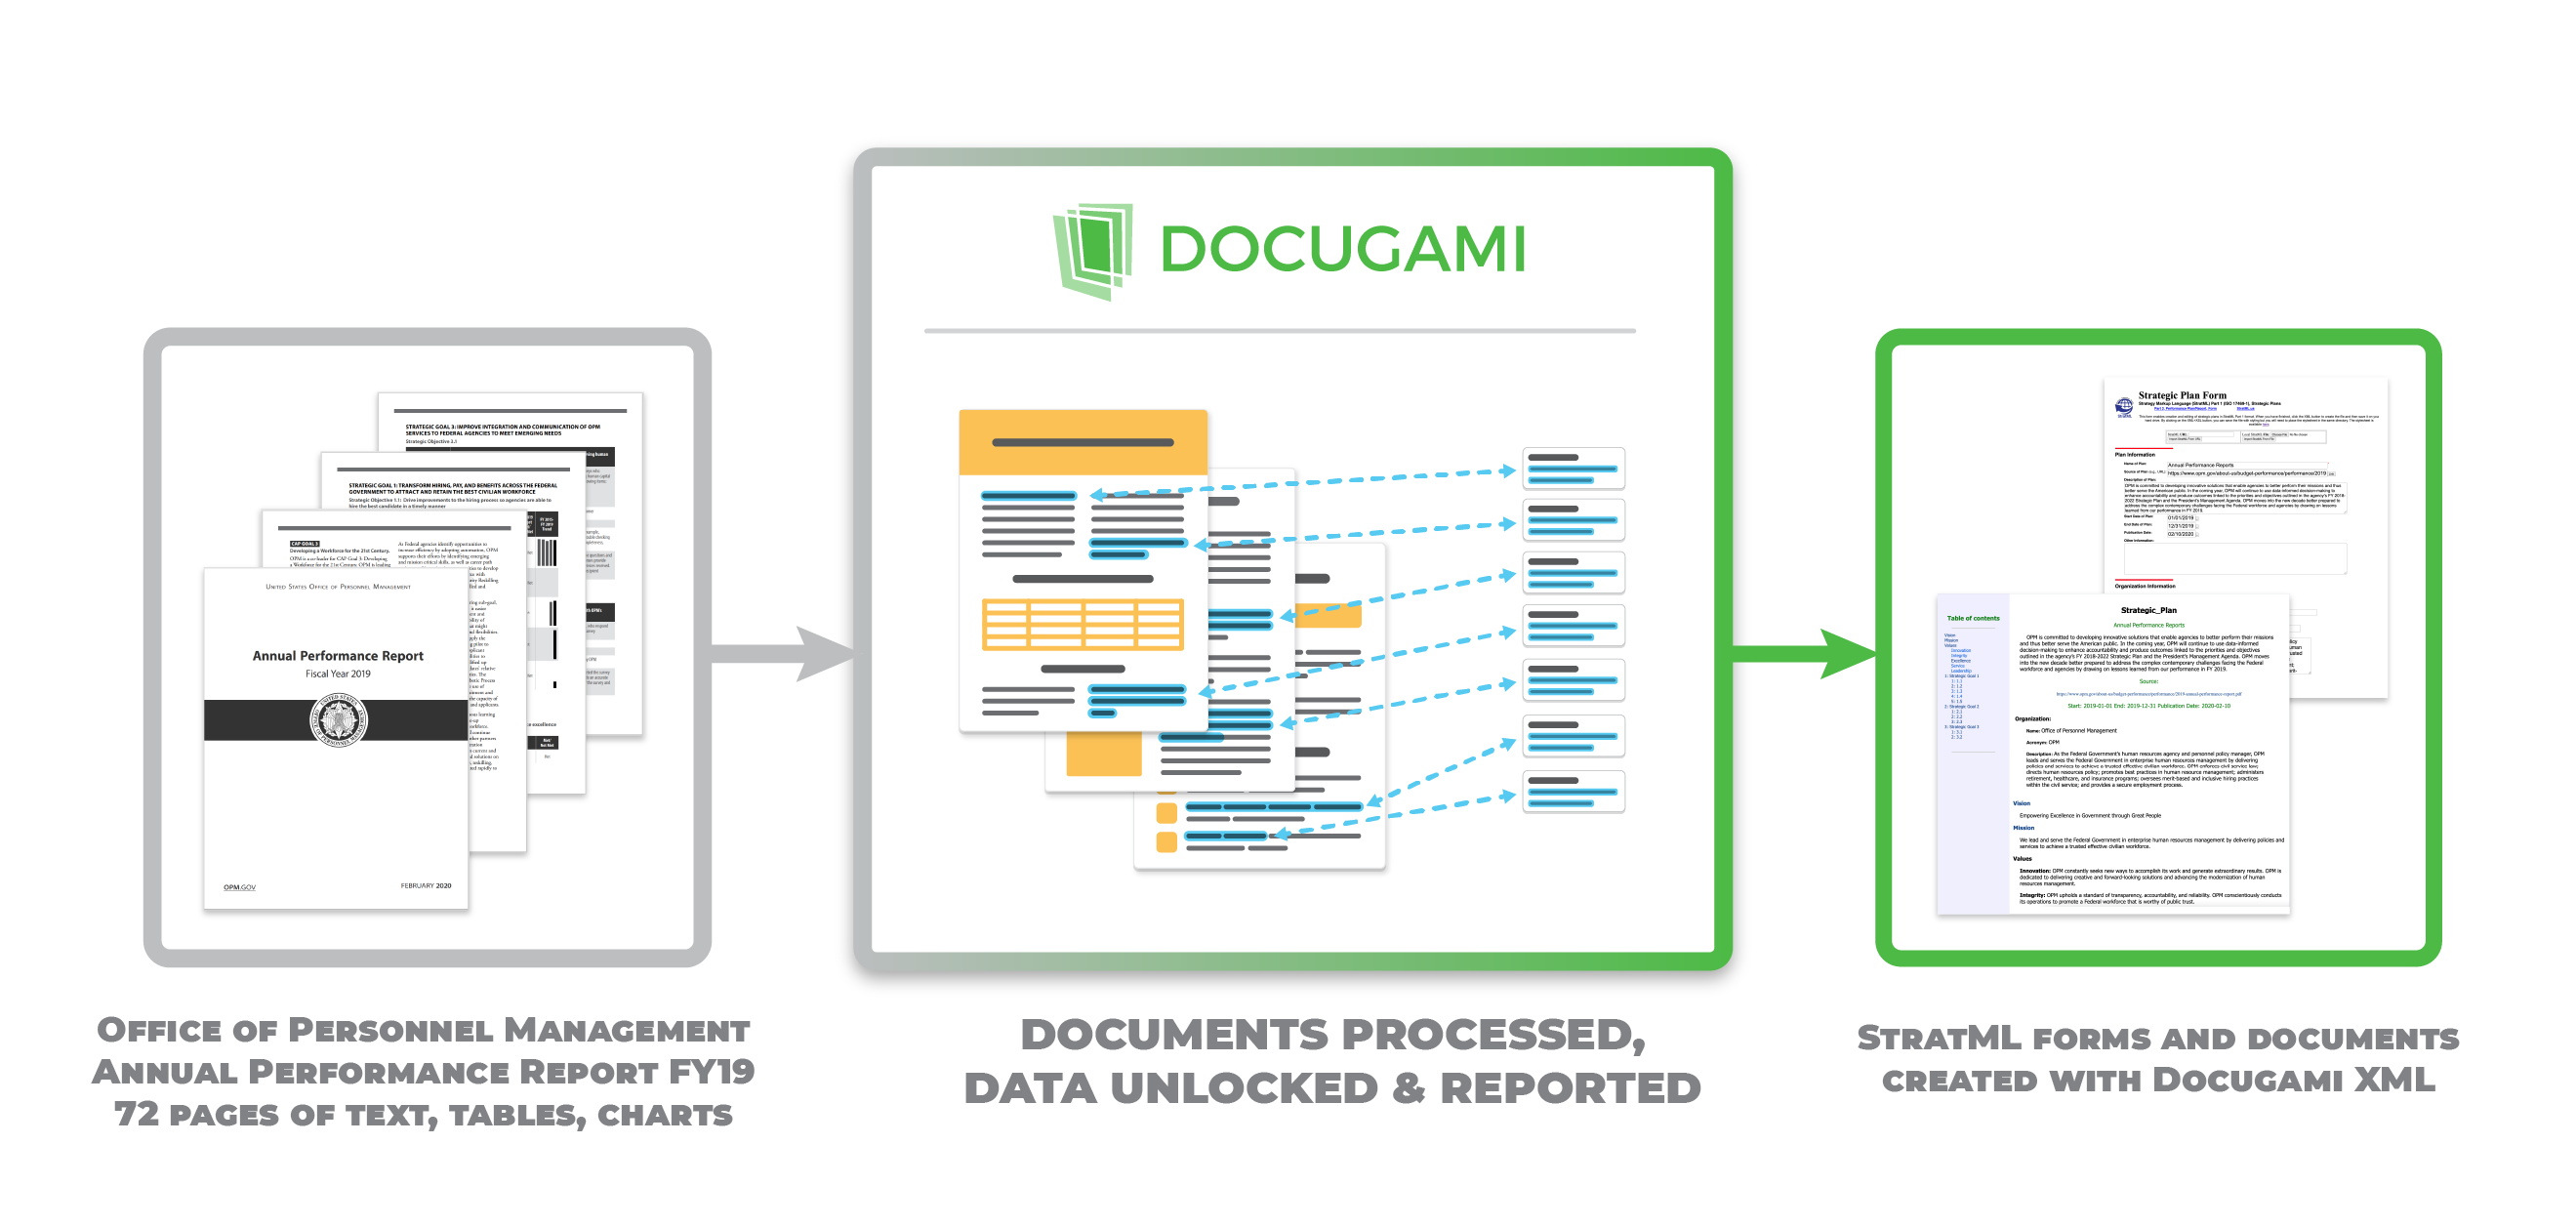 A schematic diagram, showing how a complex 72-page government document is processed by Docugami's AI so that the data in the document is unlocked and categorized, then the information is used to create streamlined StratML forms and documents representing all of the critical data in the voluminous document.